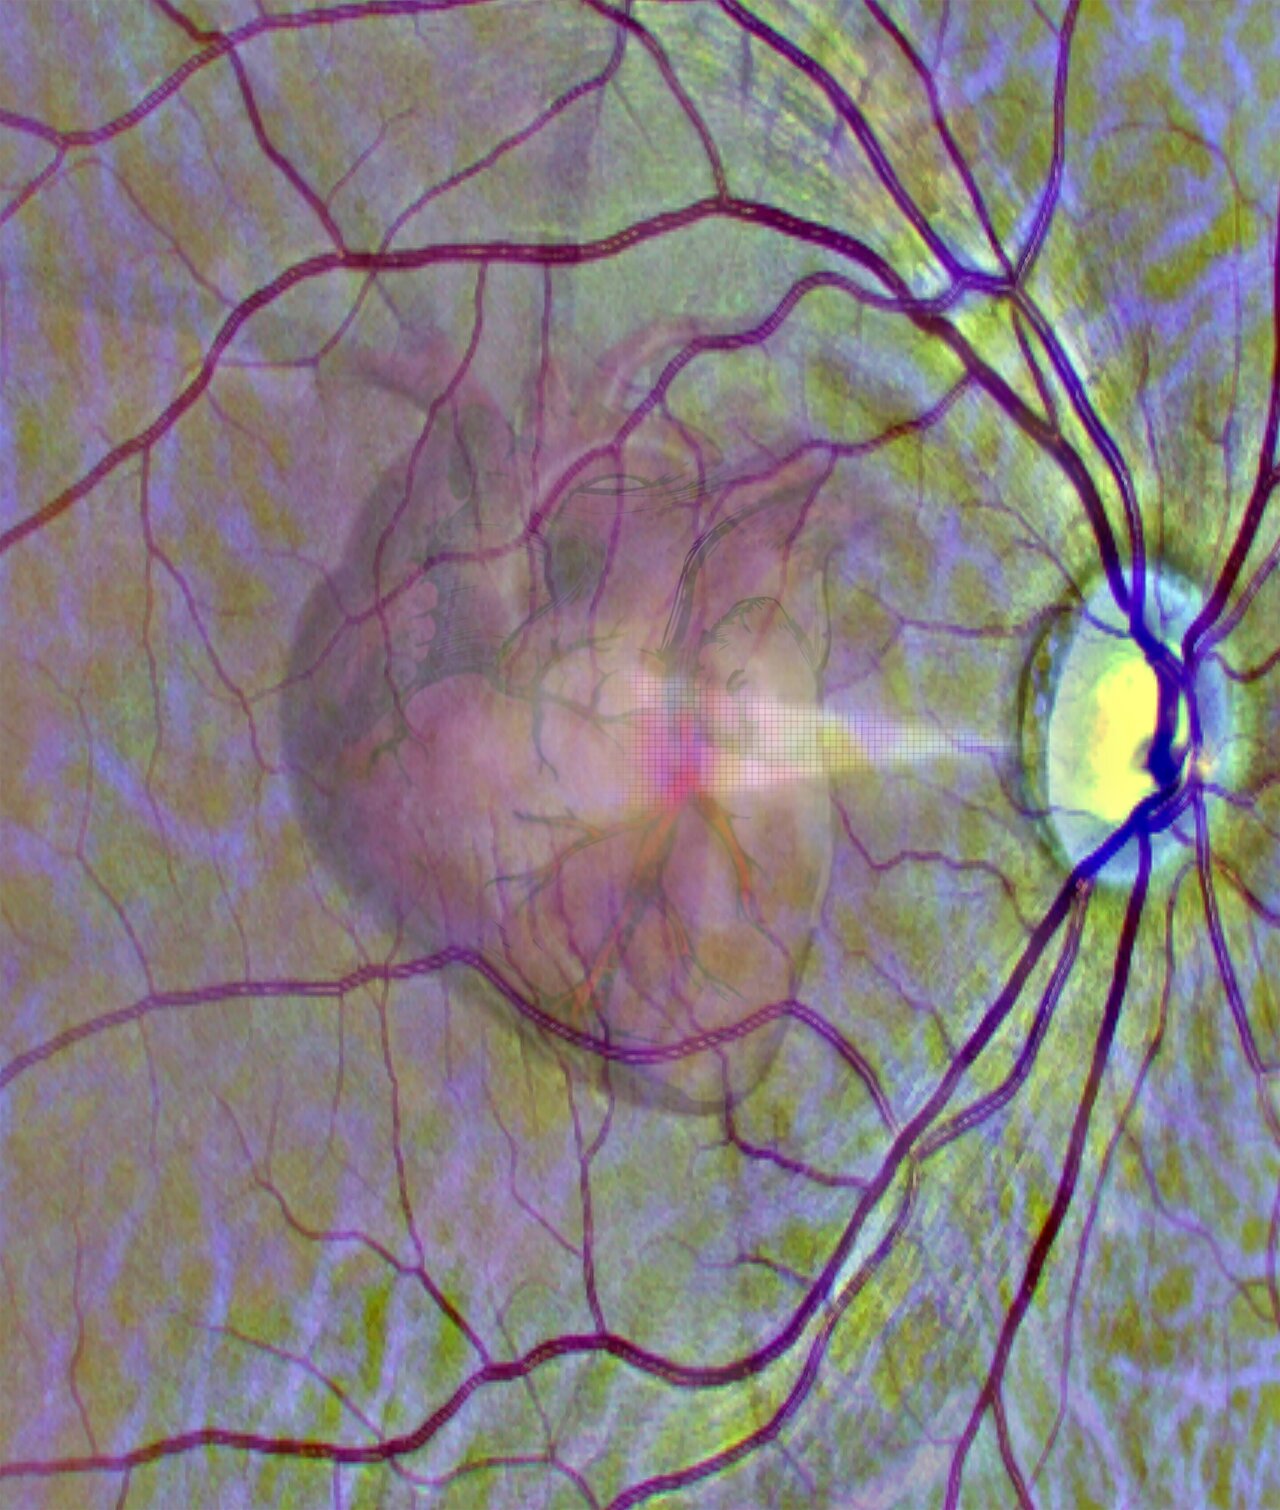 A graphical representation of the idea of using a scan of the eye to get a window into heart health.

CREDIT
University of Leeds